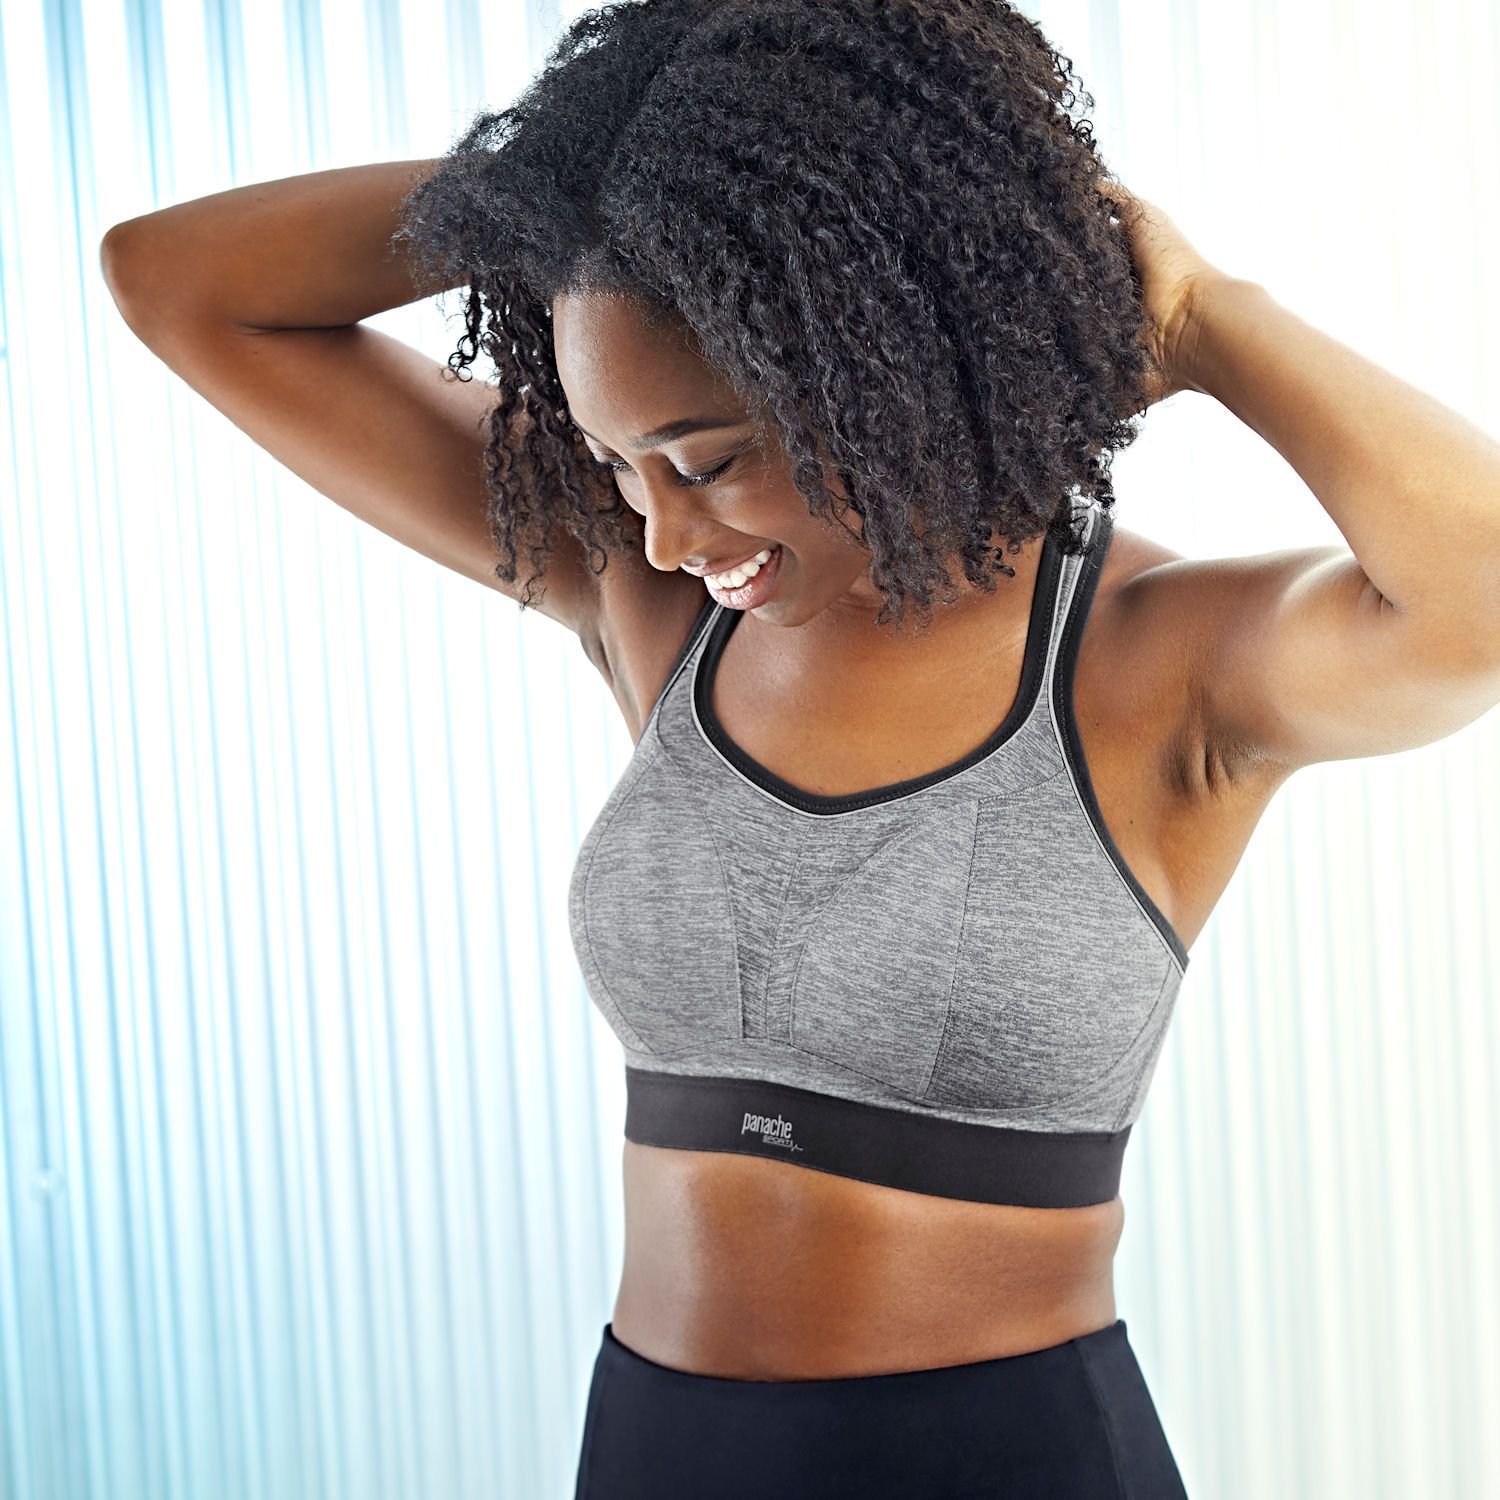 Buy Panache Wirefree Sports Bra in Charcoal Marl at Lisa's Lacies